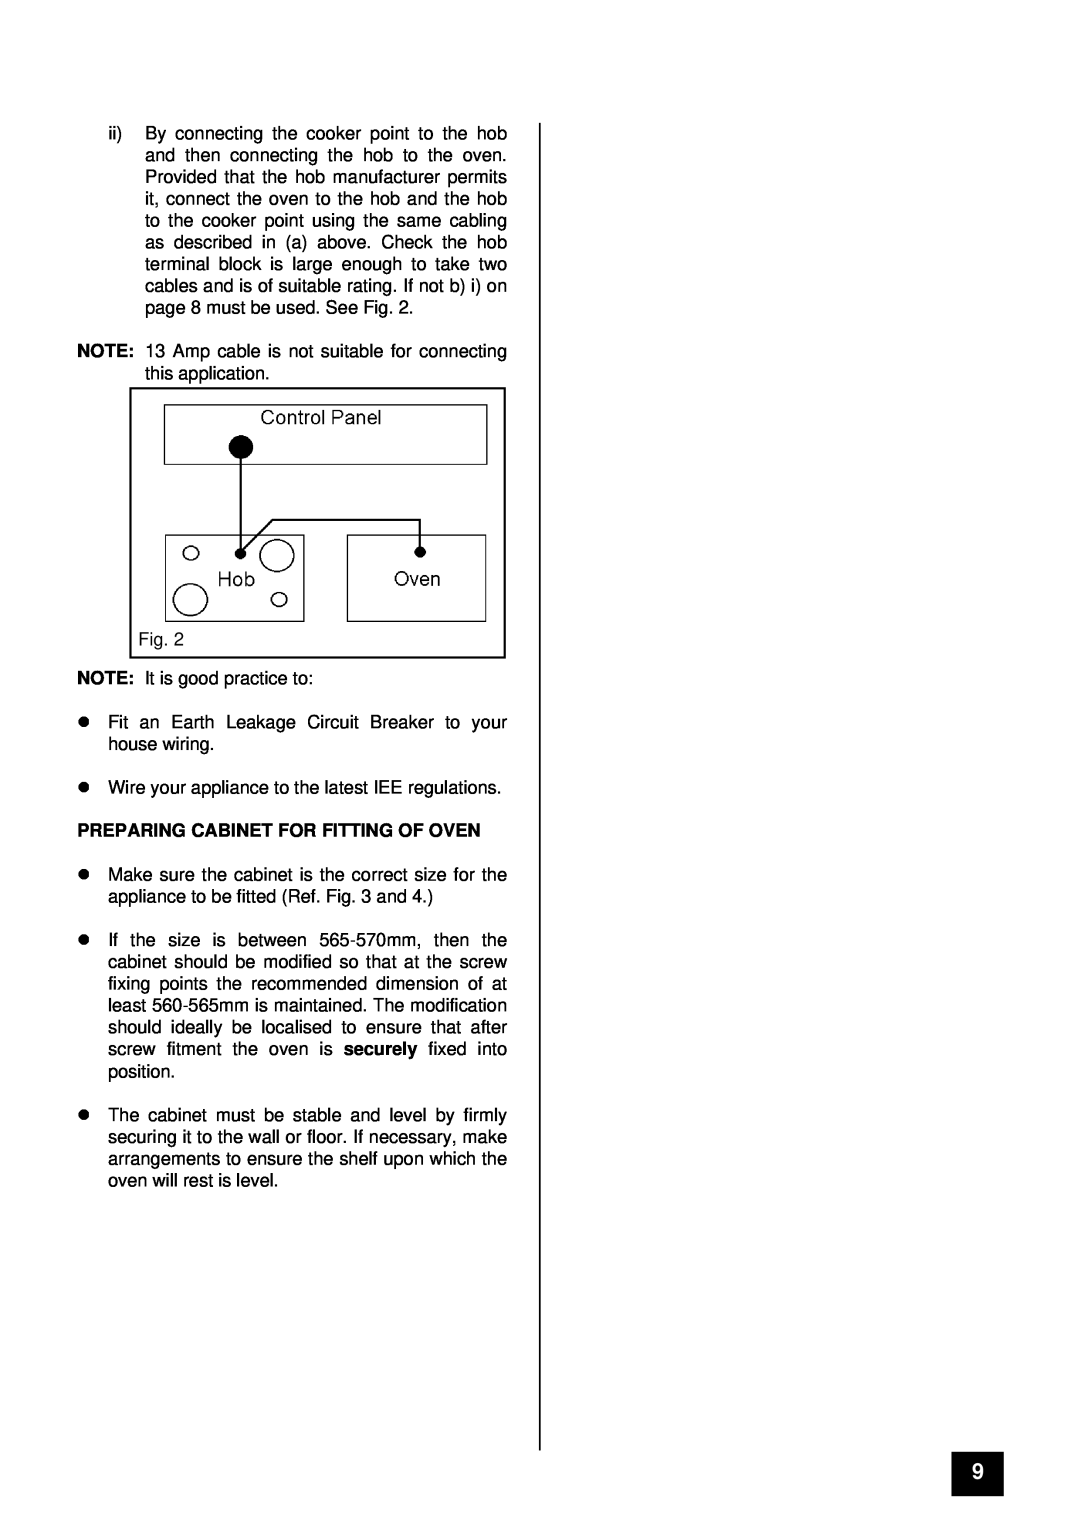 Tricity Bendix SURREY installation instructions Preparing Cabinet For Fitting Of Oven 